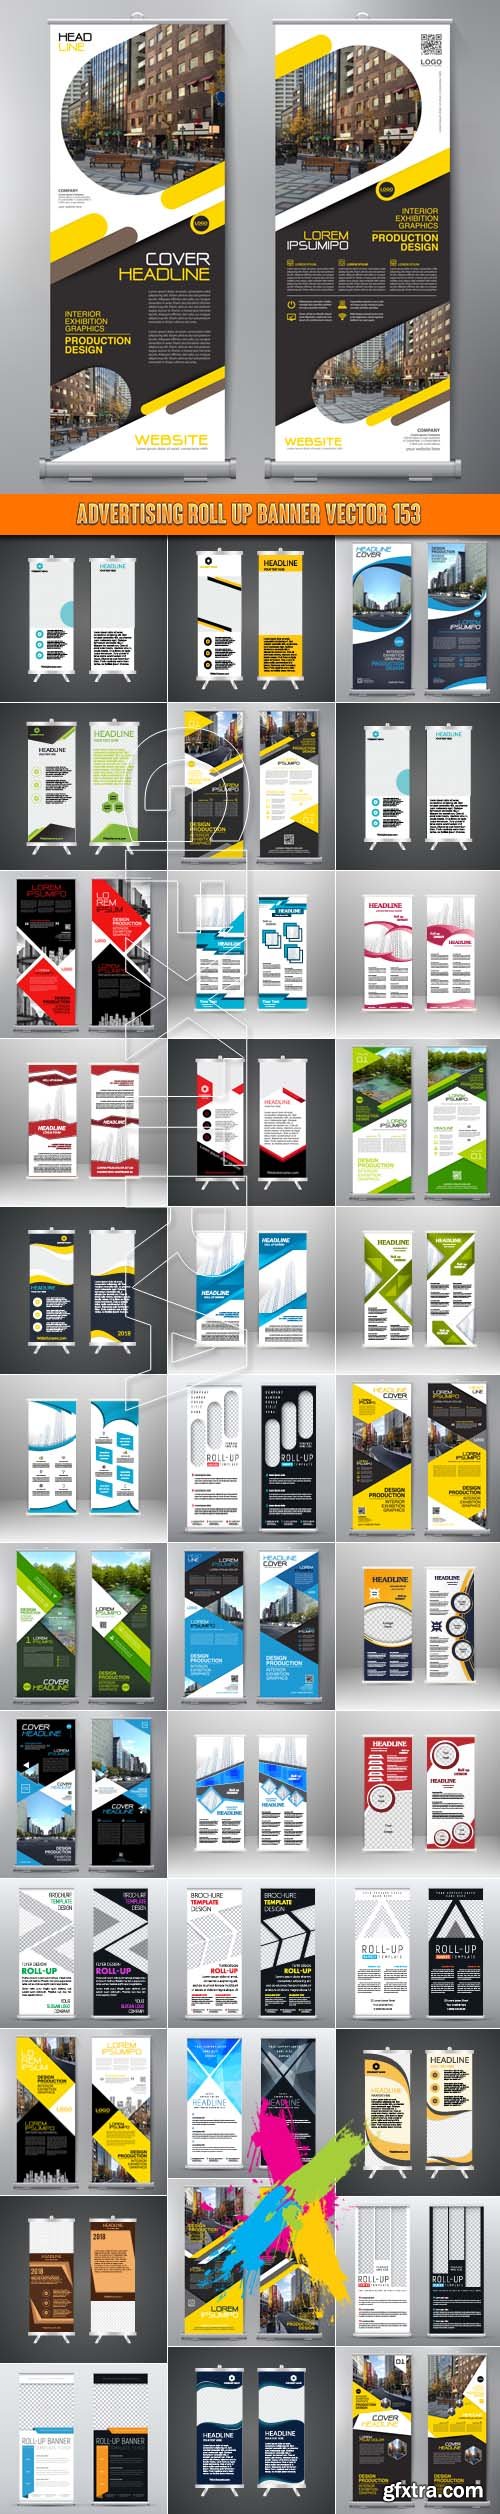 Advertising Roll up banner vector 153